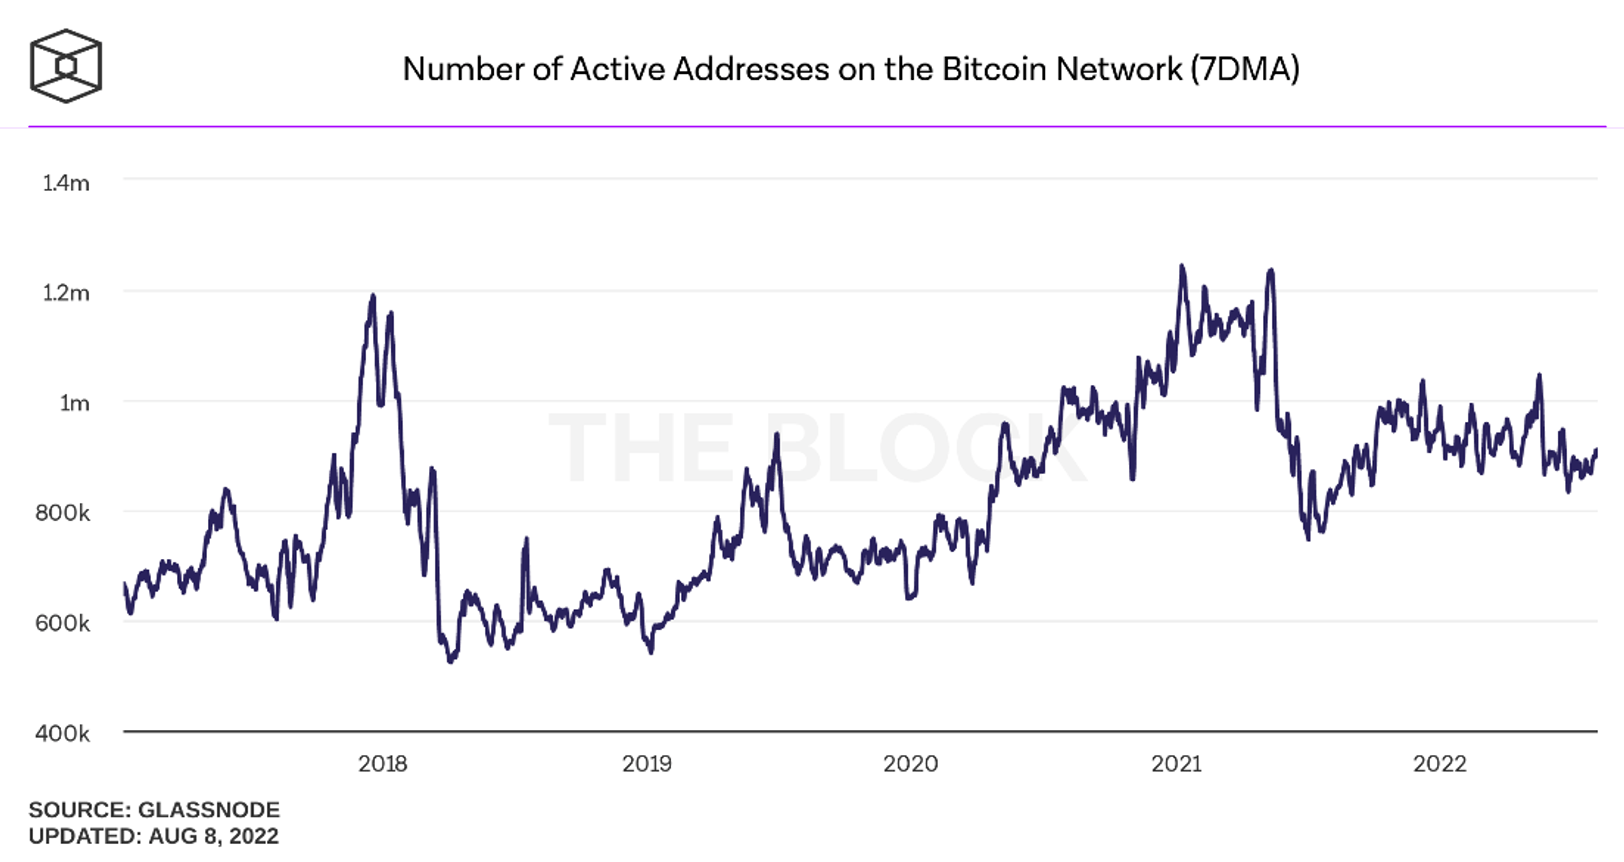 Number of active addresses chart